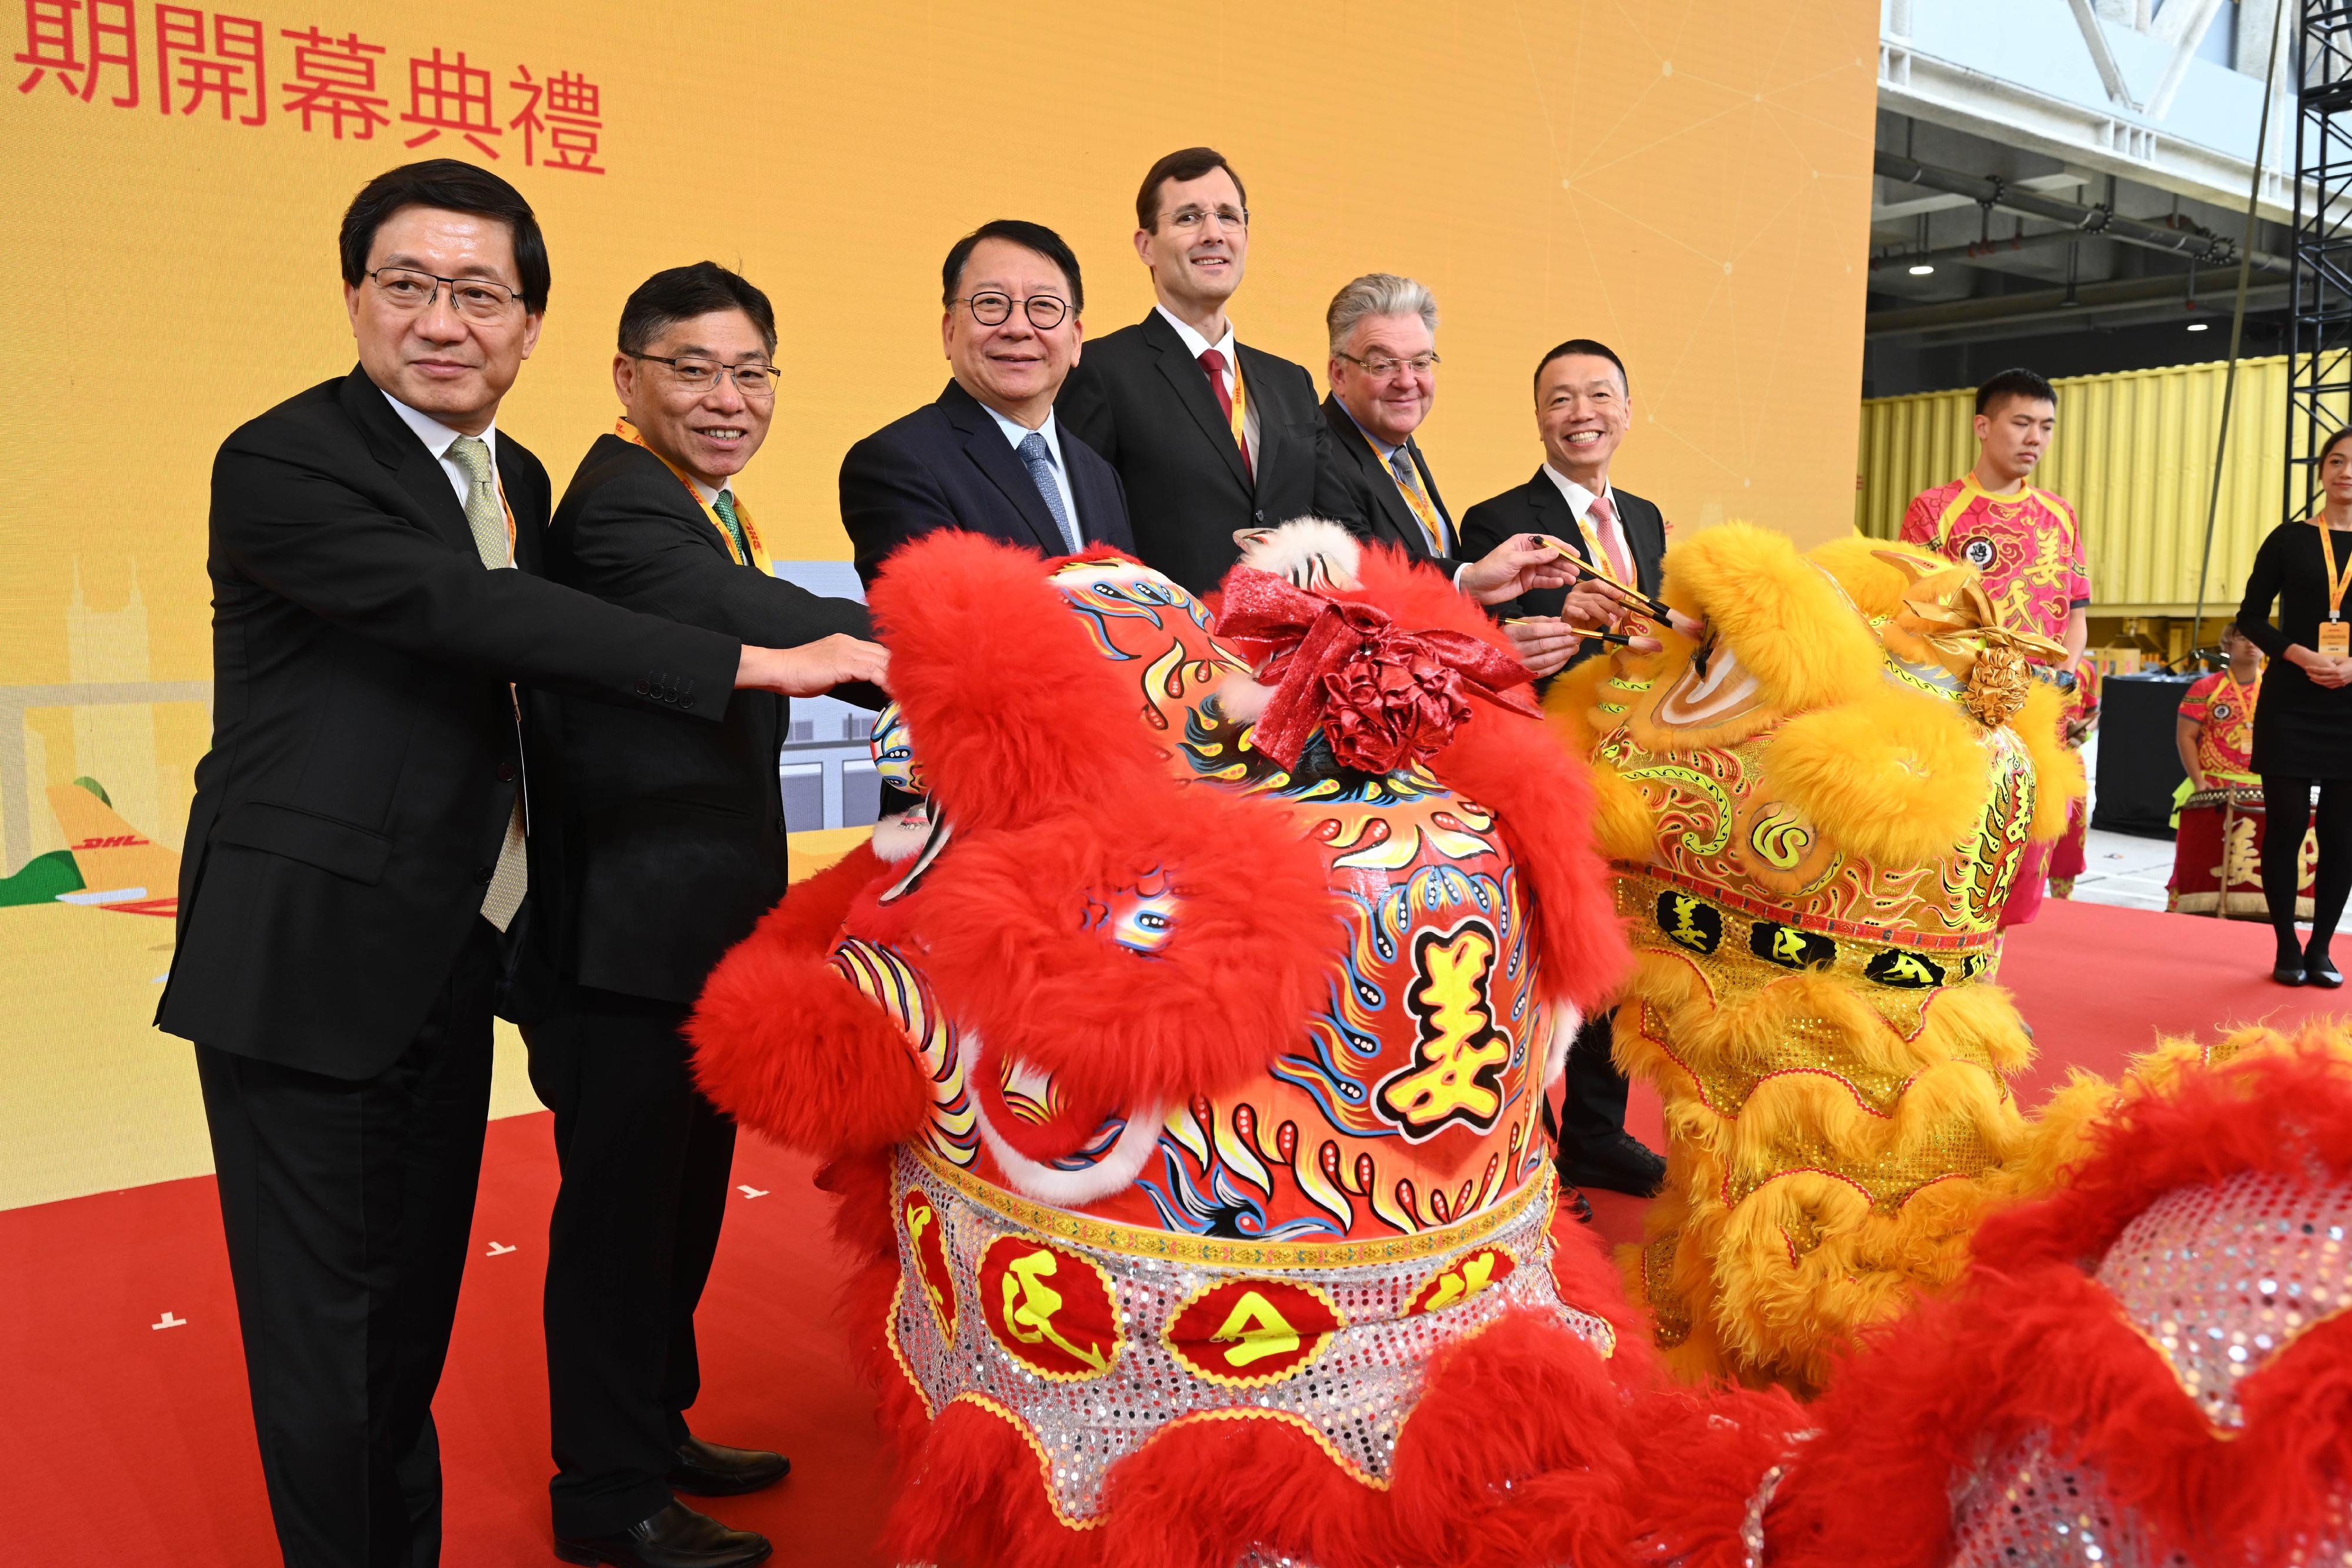 The Chief Secretary for Administration, Mr Chan Kwok-ki, attended the DHL Central Asia Hub Phase 3 Grand Opening today (November 14). Photo shows (from left) the Chief Executive Officer of the Airport Authority Hong Kong, Mr Fred Lam; the Secretary for Transport and Logistics, Mr Lam Sai-hung; Mr Chan; the Chief Executive Officer of the DHL Group, Dr Tobias Meyer; the Chief Executive Officer of the DHL Express, Mr John Pearson; and the Chief Executive Officer of the DHL Express Asia Pacific, Mr Ken Lee, in a lion dance eye-dotting ceremony at the grand opening.